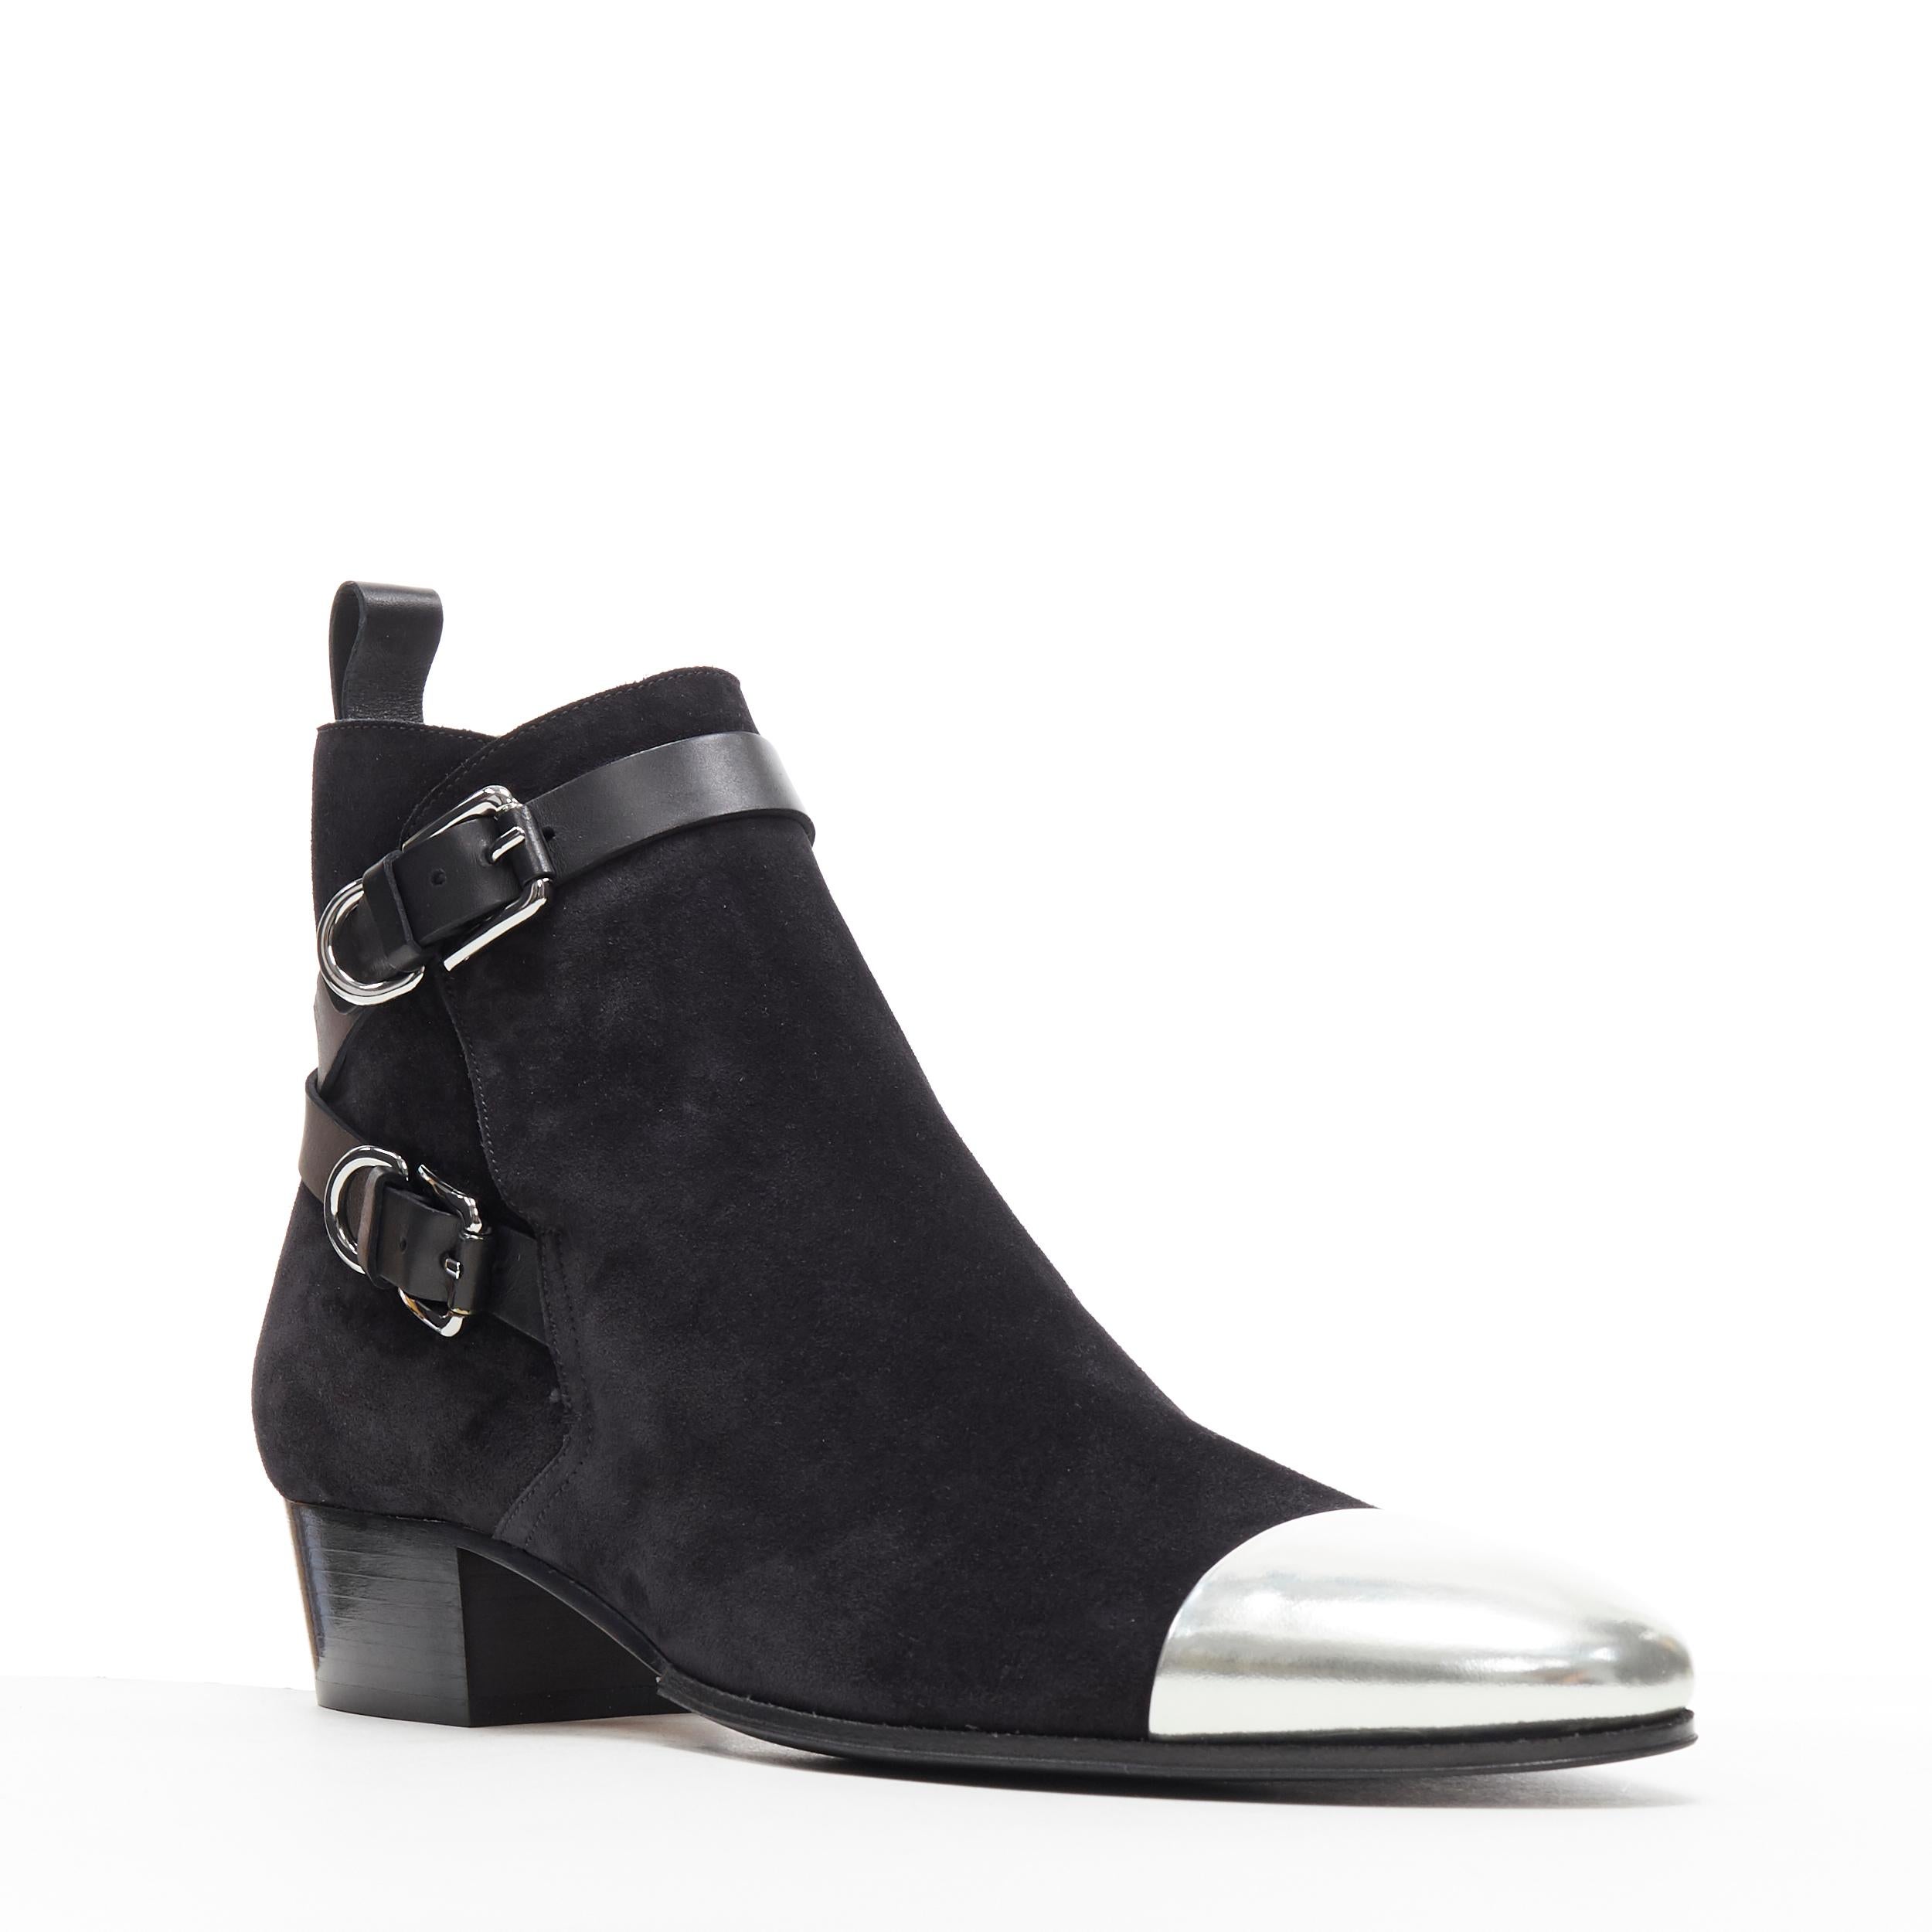 new BALMAIN classic black suede silver toe cap buckle anthos ankle boots EU44
Brand: Balmain
Designer: Olivier Rousteing
Model Name / Style: Suede ankle boot
Material: Suede
Color: Black
Pattern: Solid
Closure: Buckle
Extra Detail: Black genuine